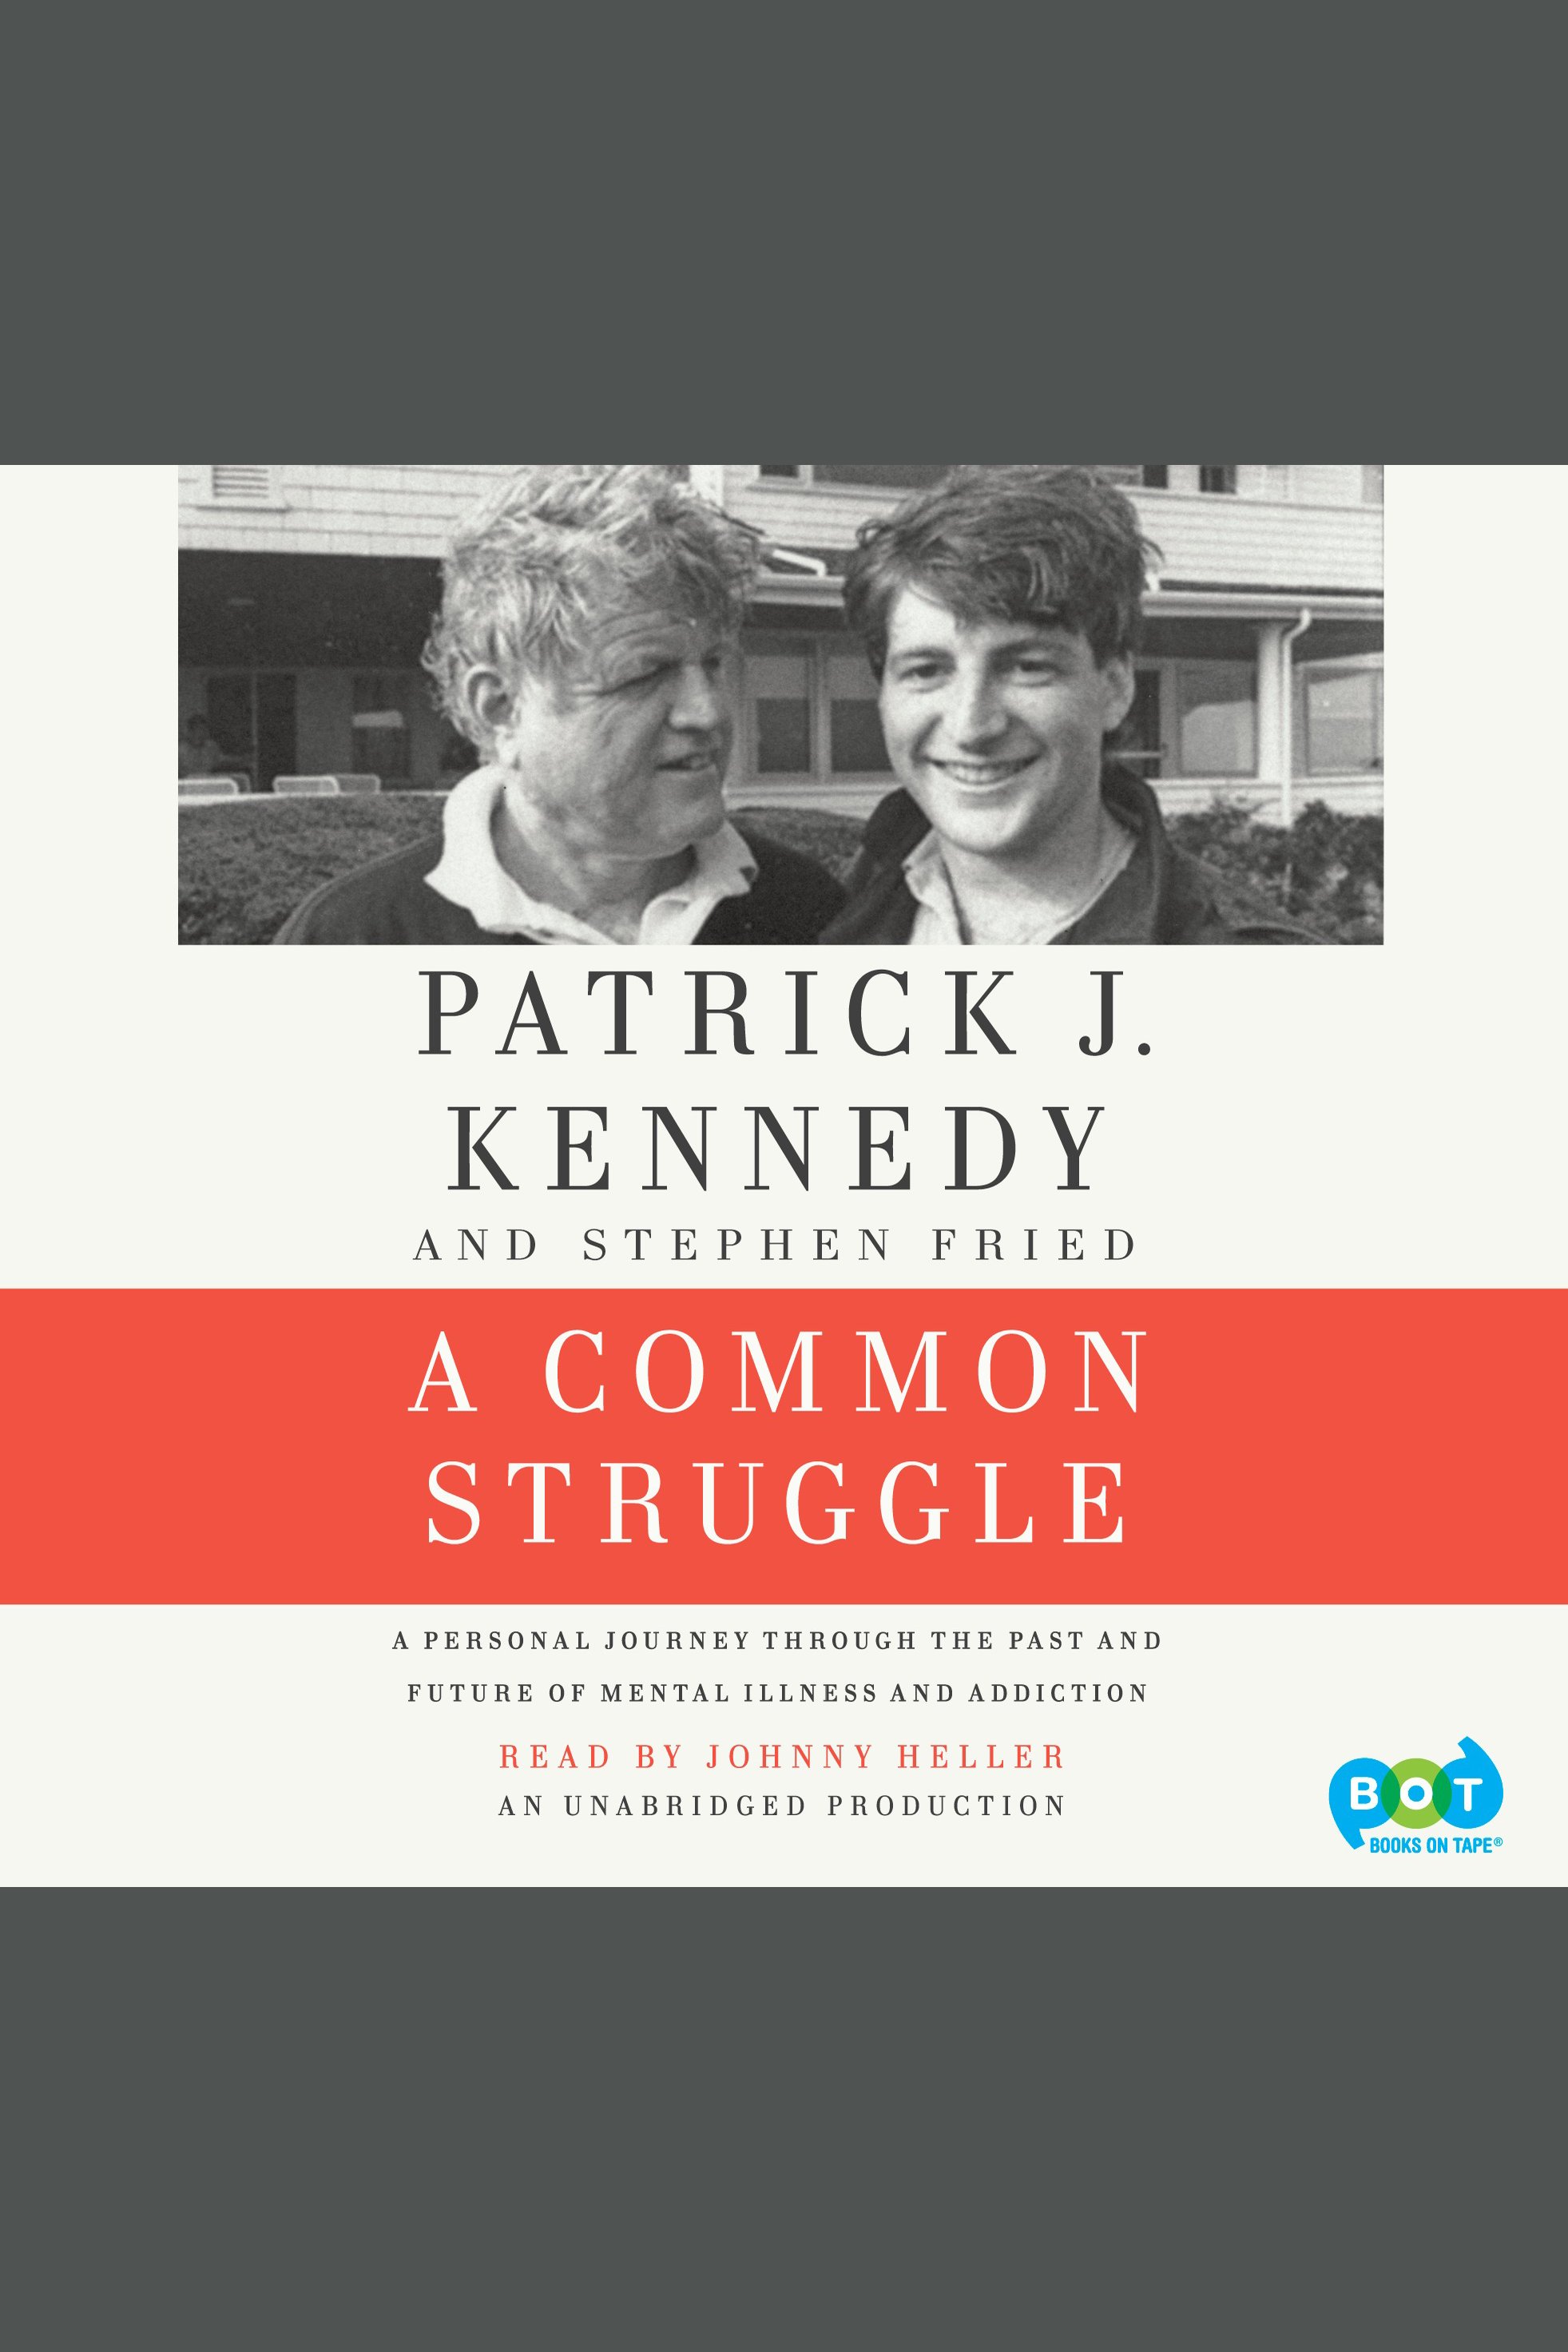 Image de couverture de Common Struggle, A [electronic resource] : A Personal Journey Through the Past and Future of Mental Illness and Addiction